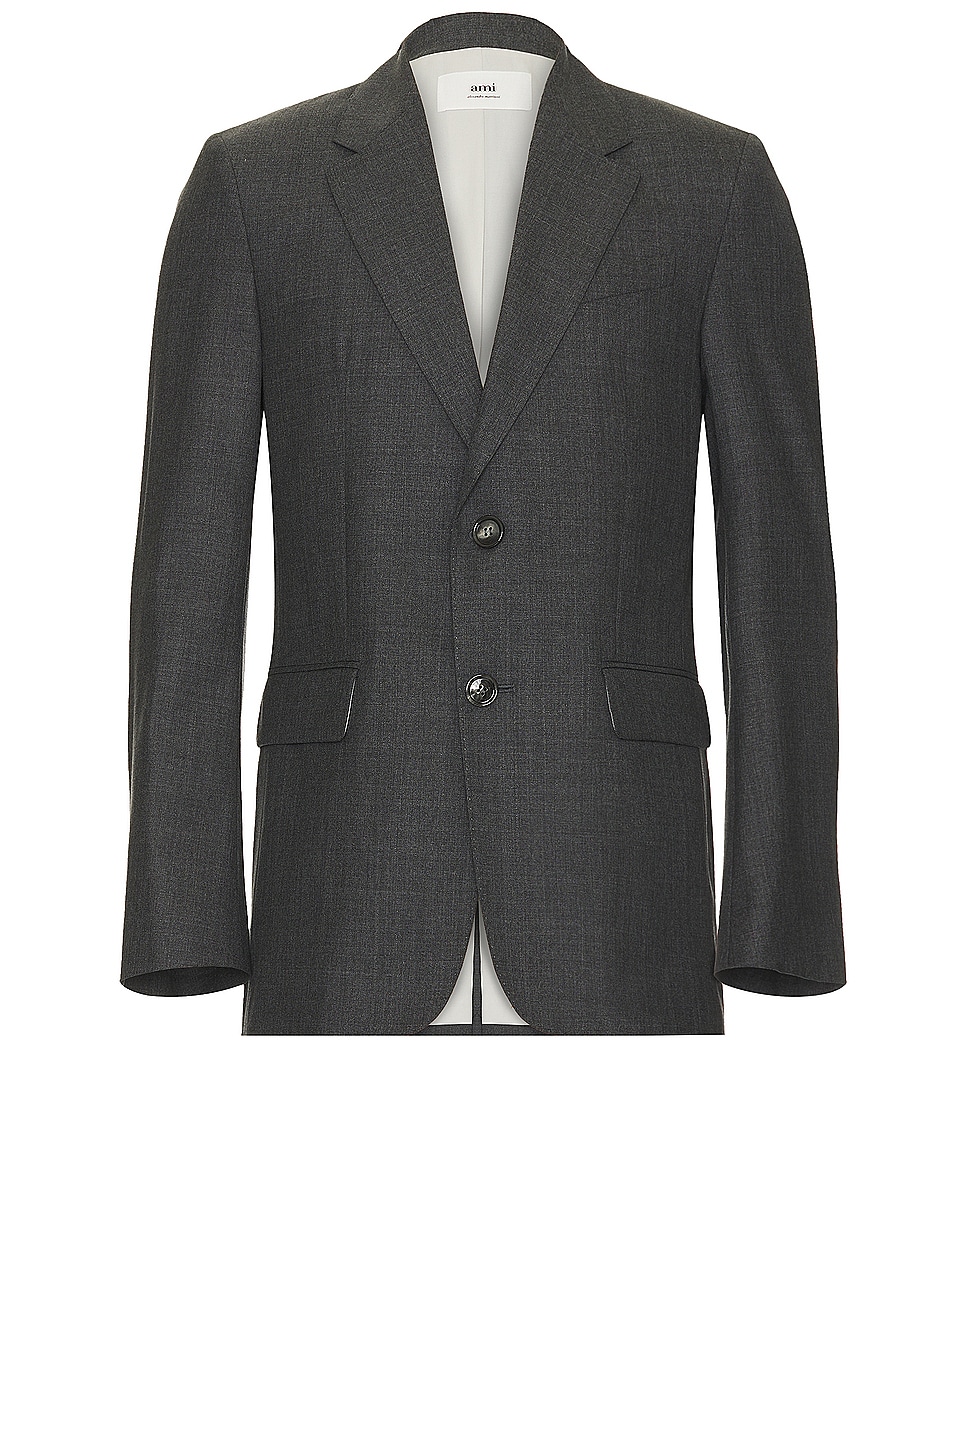 Image 1 of ami Two Button Jacket in Heather Grey